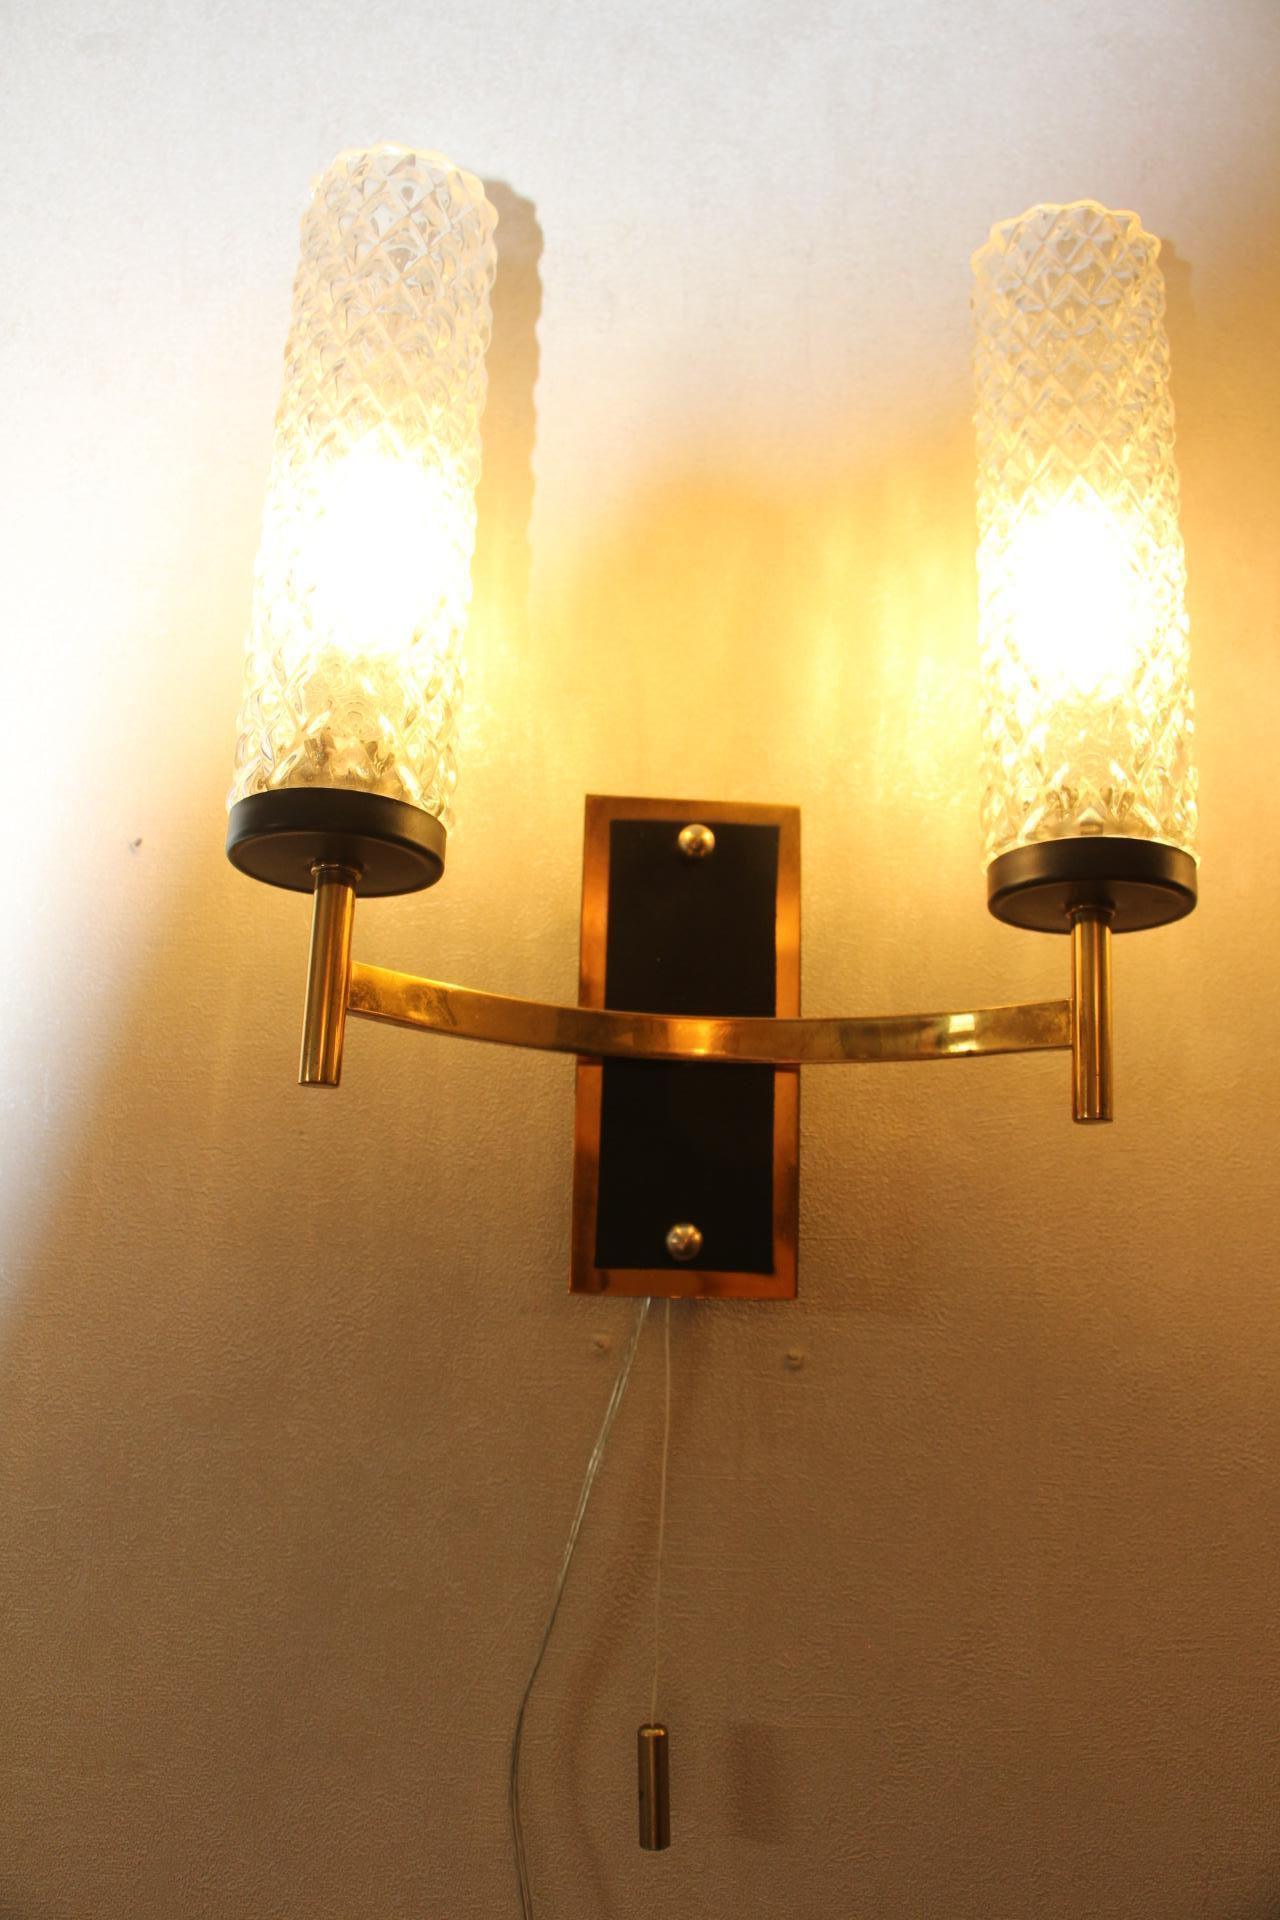 Pair of French Midcentury Sconces, Maison Arlus, Lunel Wall Lights In Good Condition For Sale In Saint-Ouen, FR